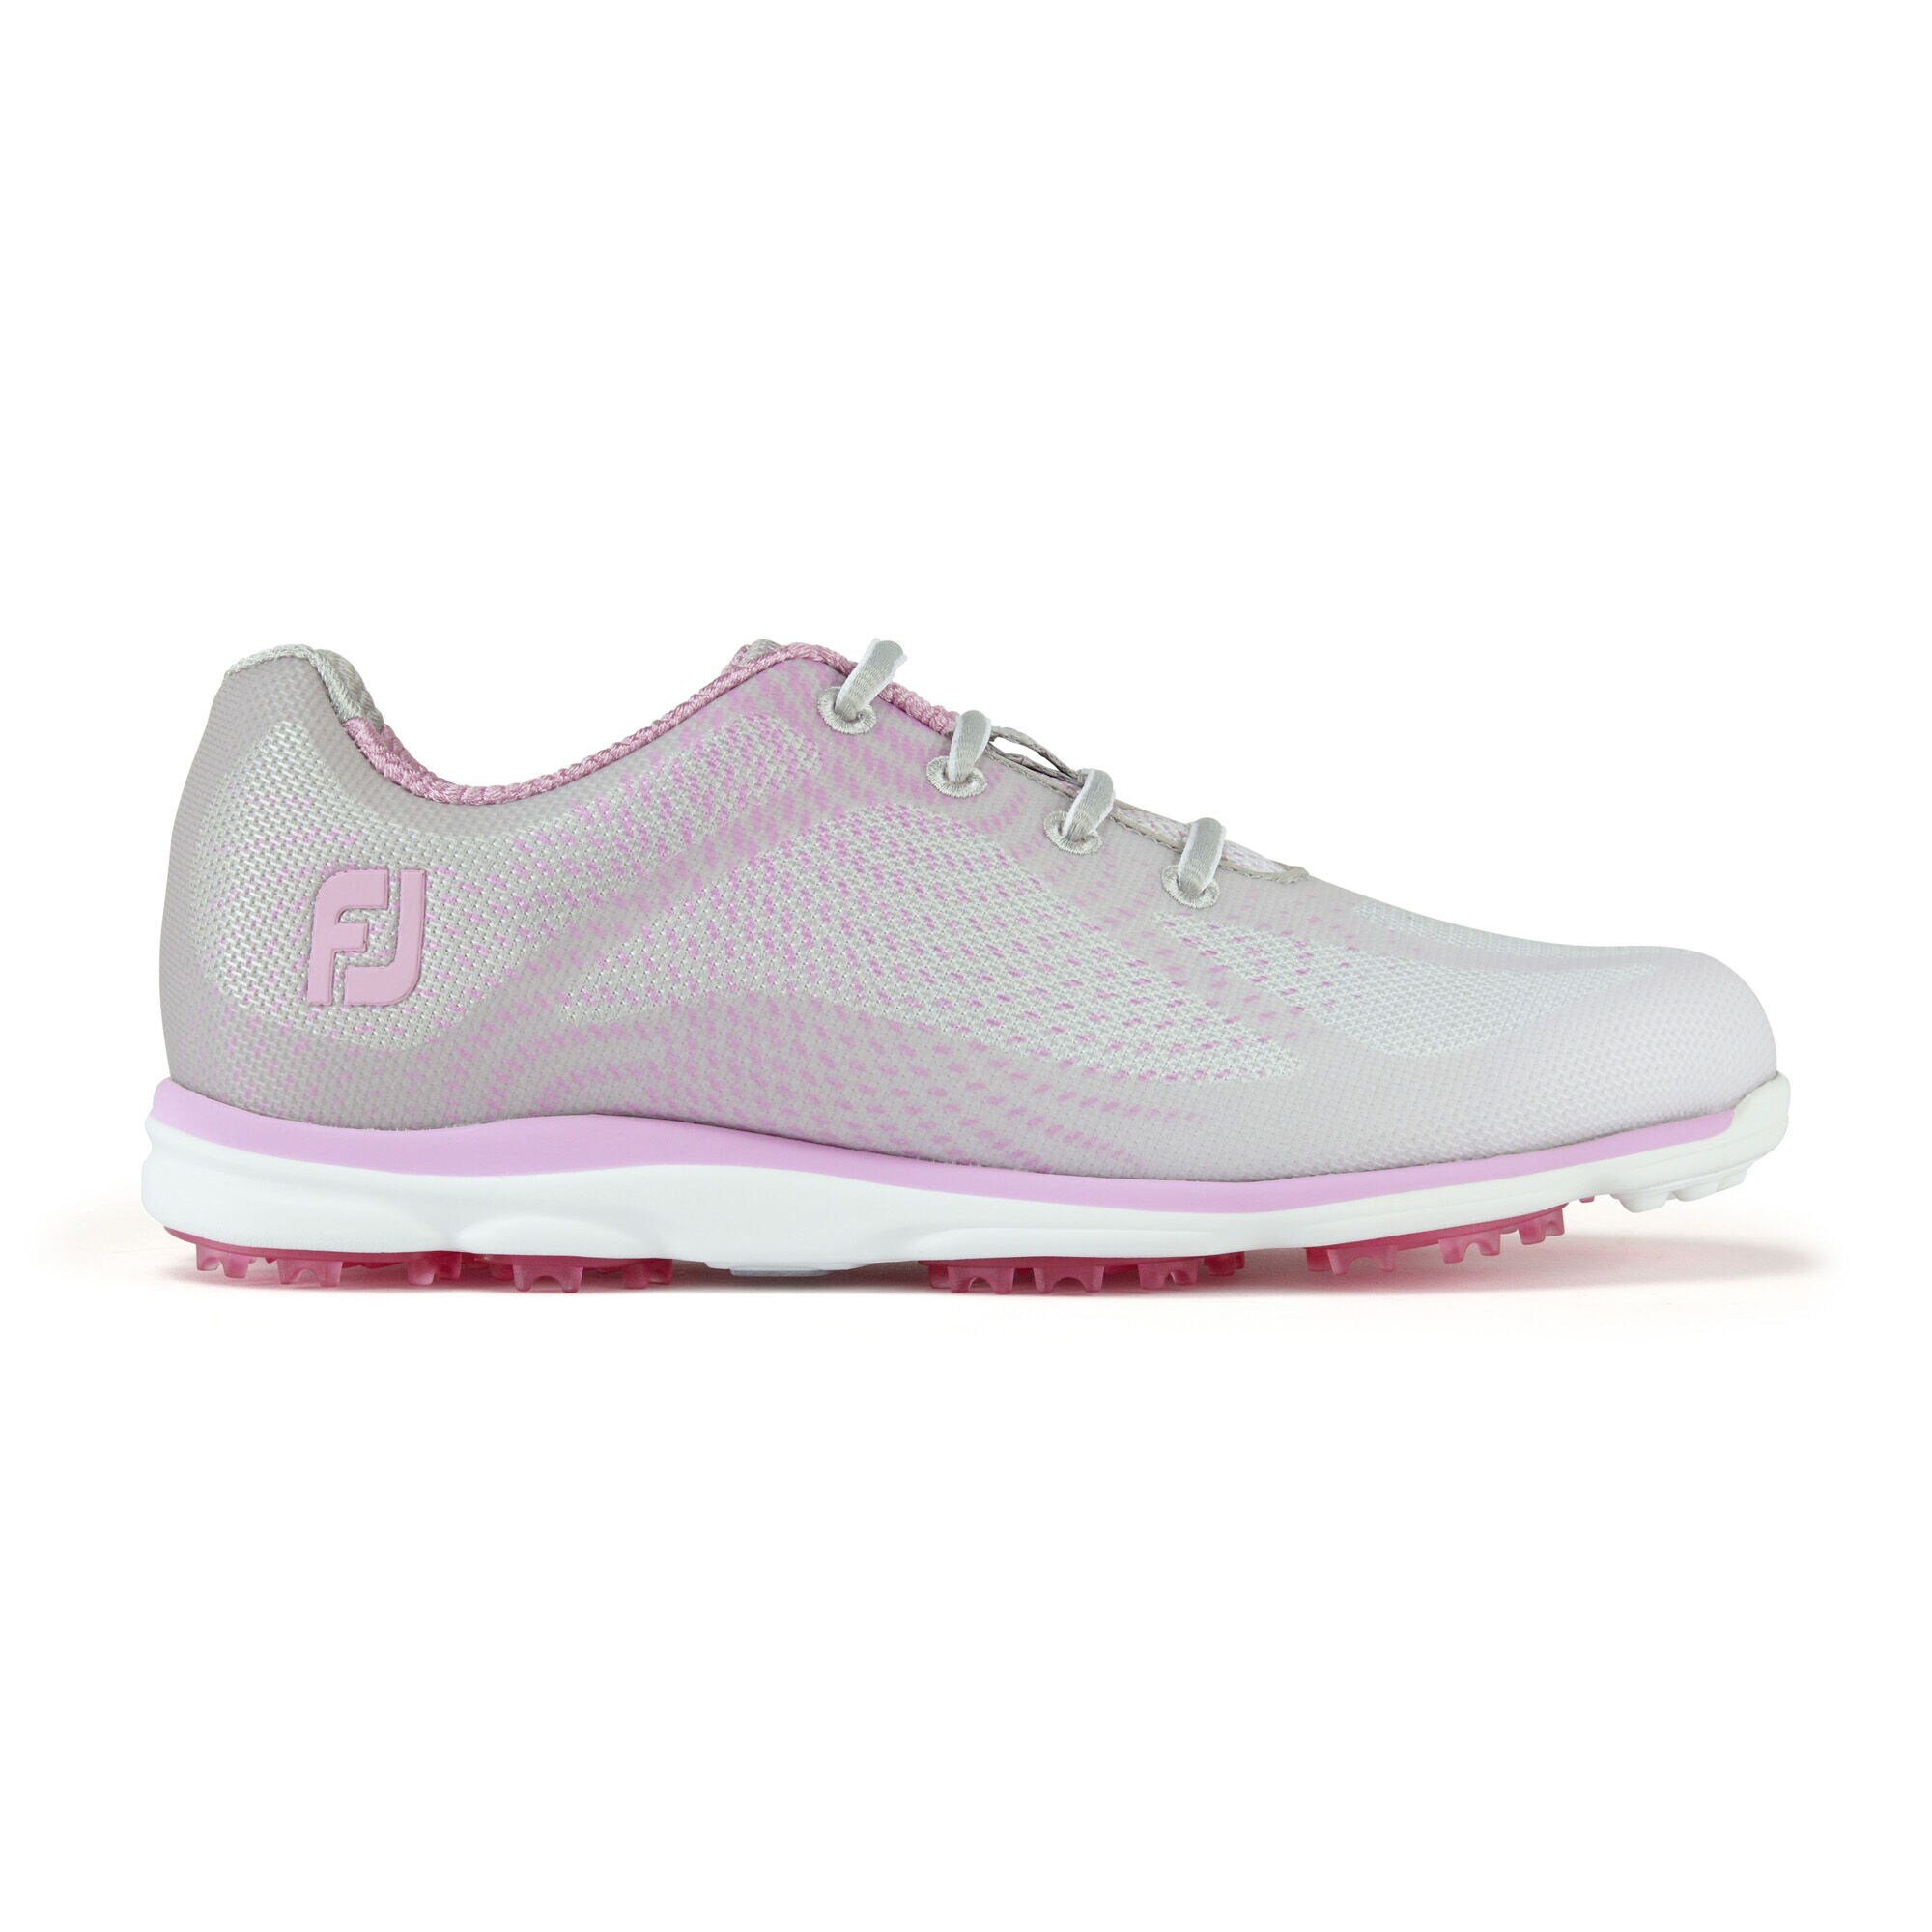 footjoy empower golf shoes